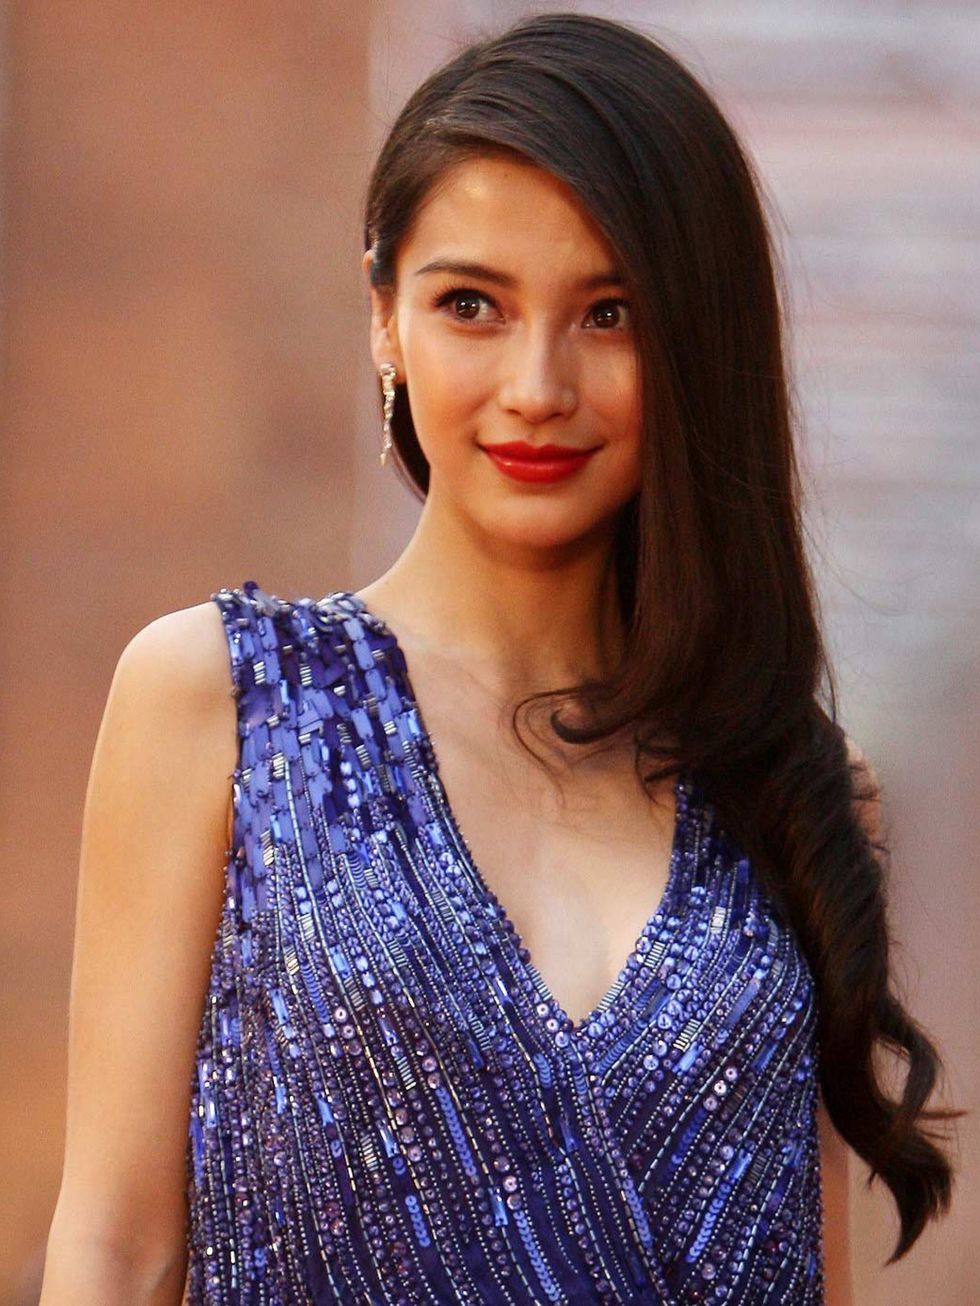 <p>Angelababy: The ethereally beautiful model and actress Angela Yeung Wing (a.k.a Angelababy) can be found working the red carpet in princess gowns and gracing the front row of Paris shows from Elie Saab to Valentino. </p>